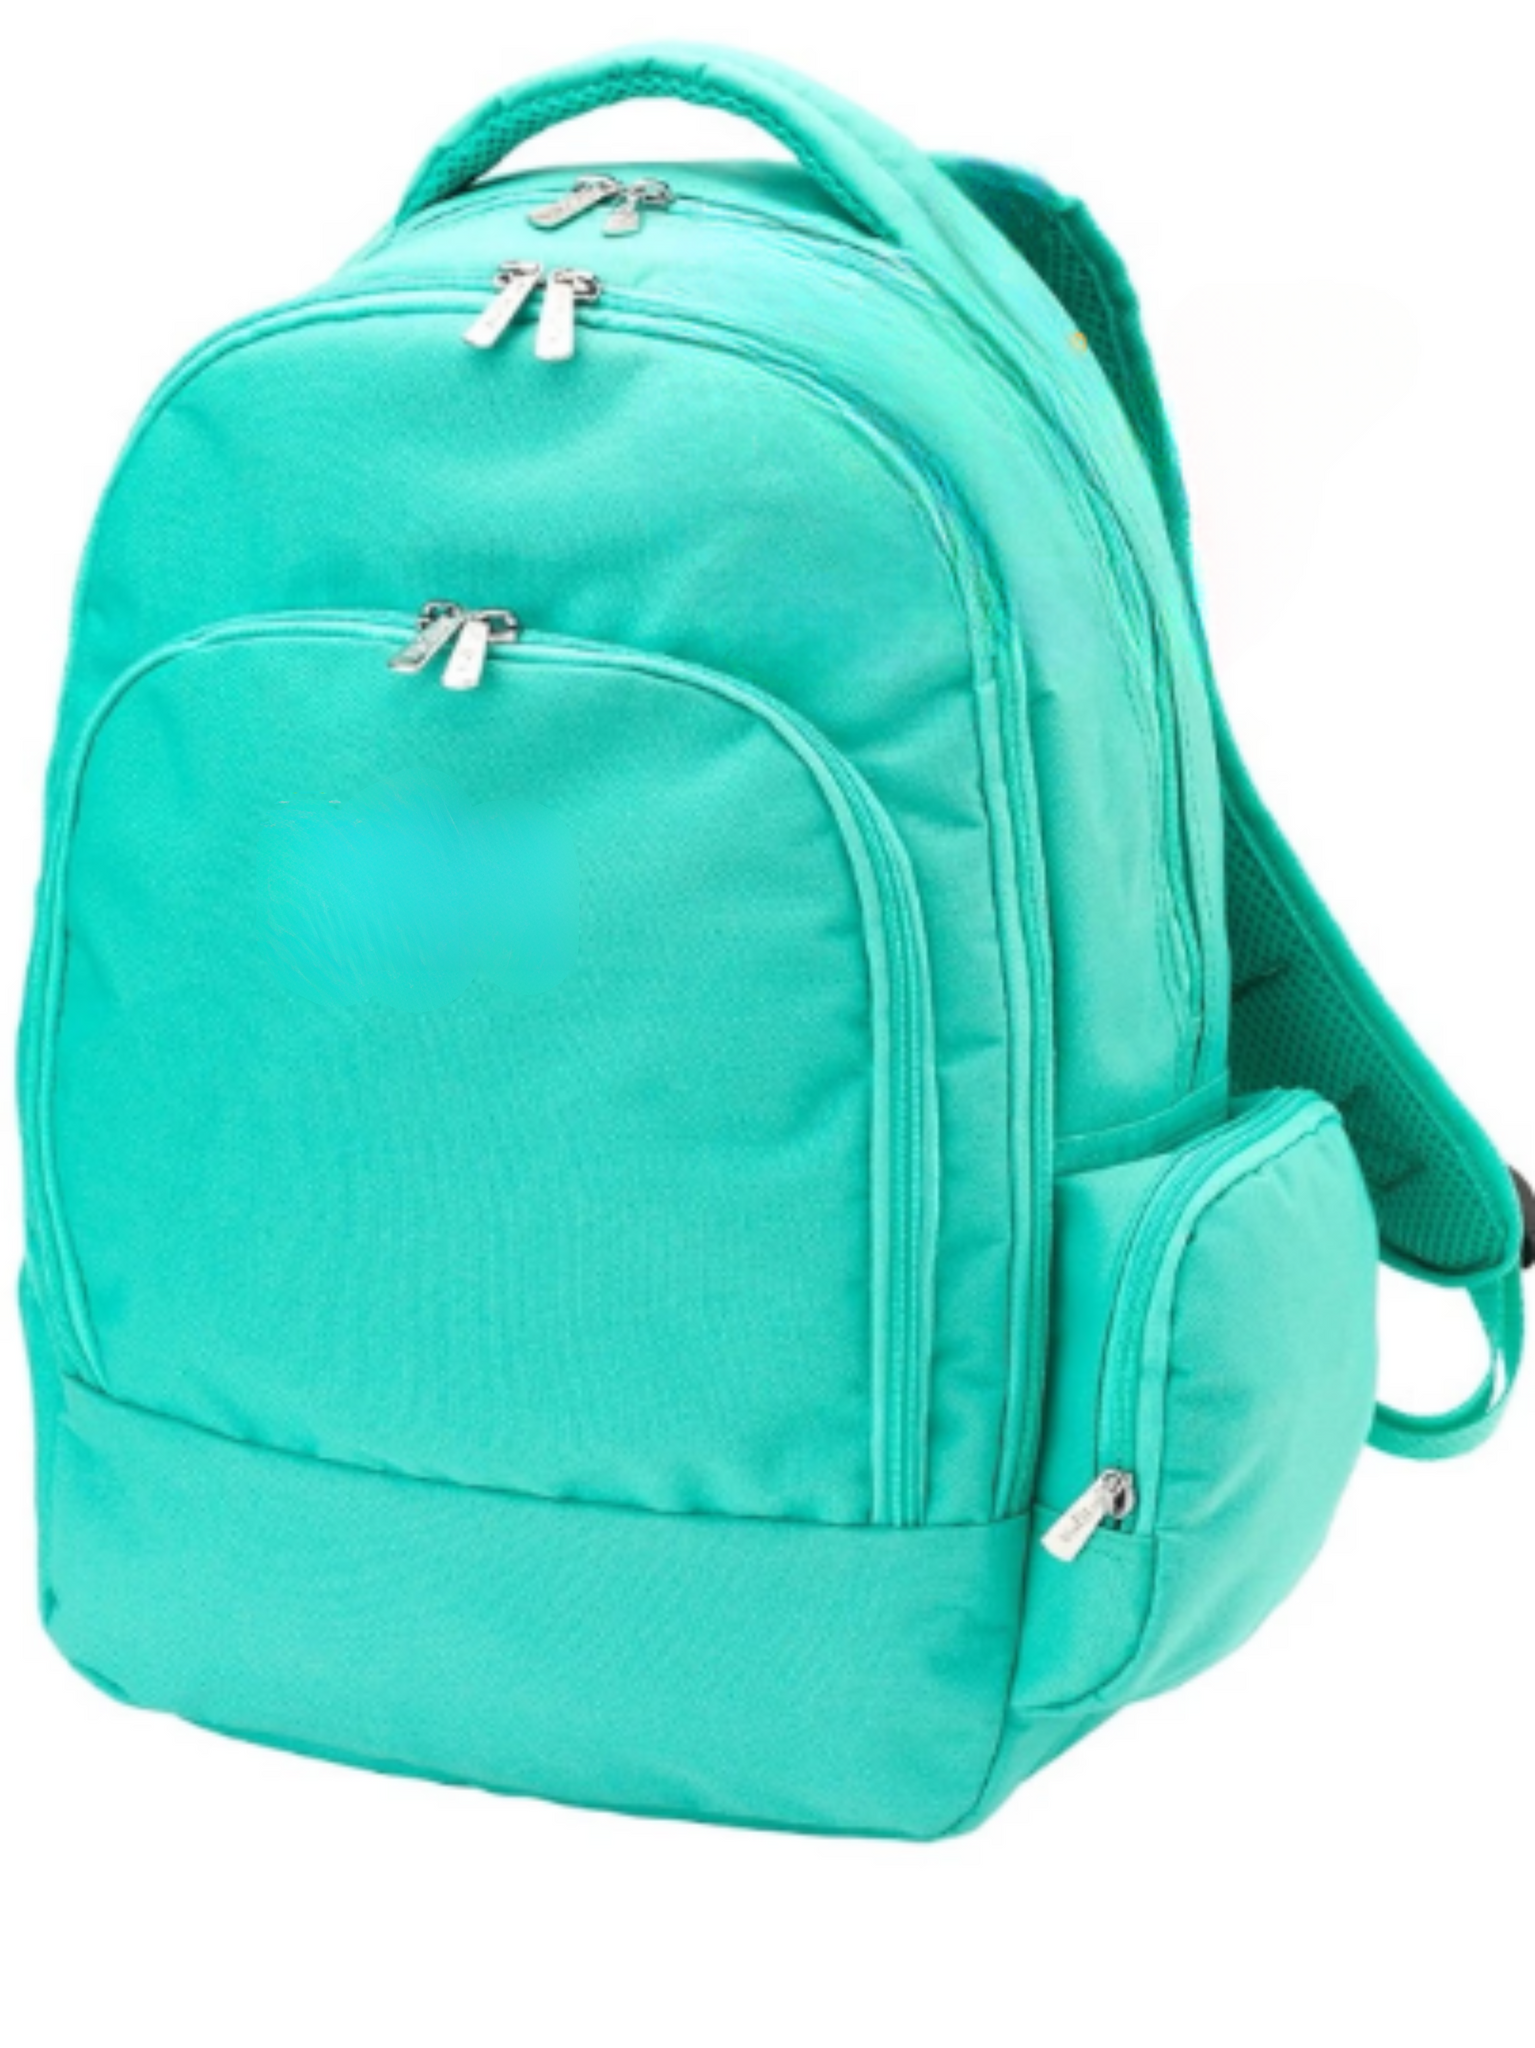 Kids Backpack, Back to School. Mint. Custom Monogram. - touchofsouth